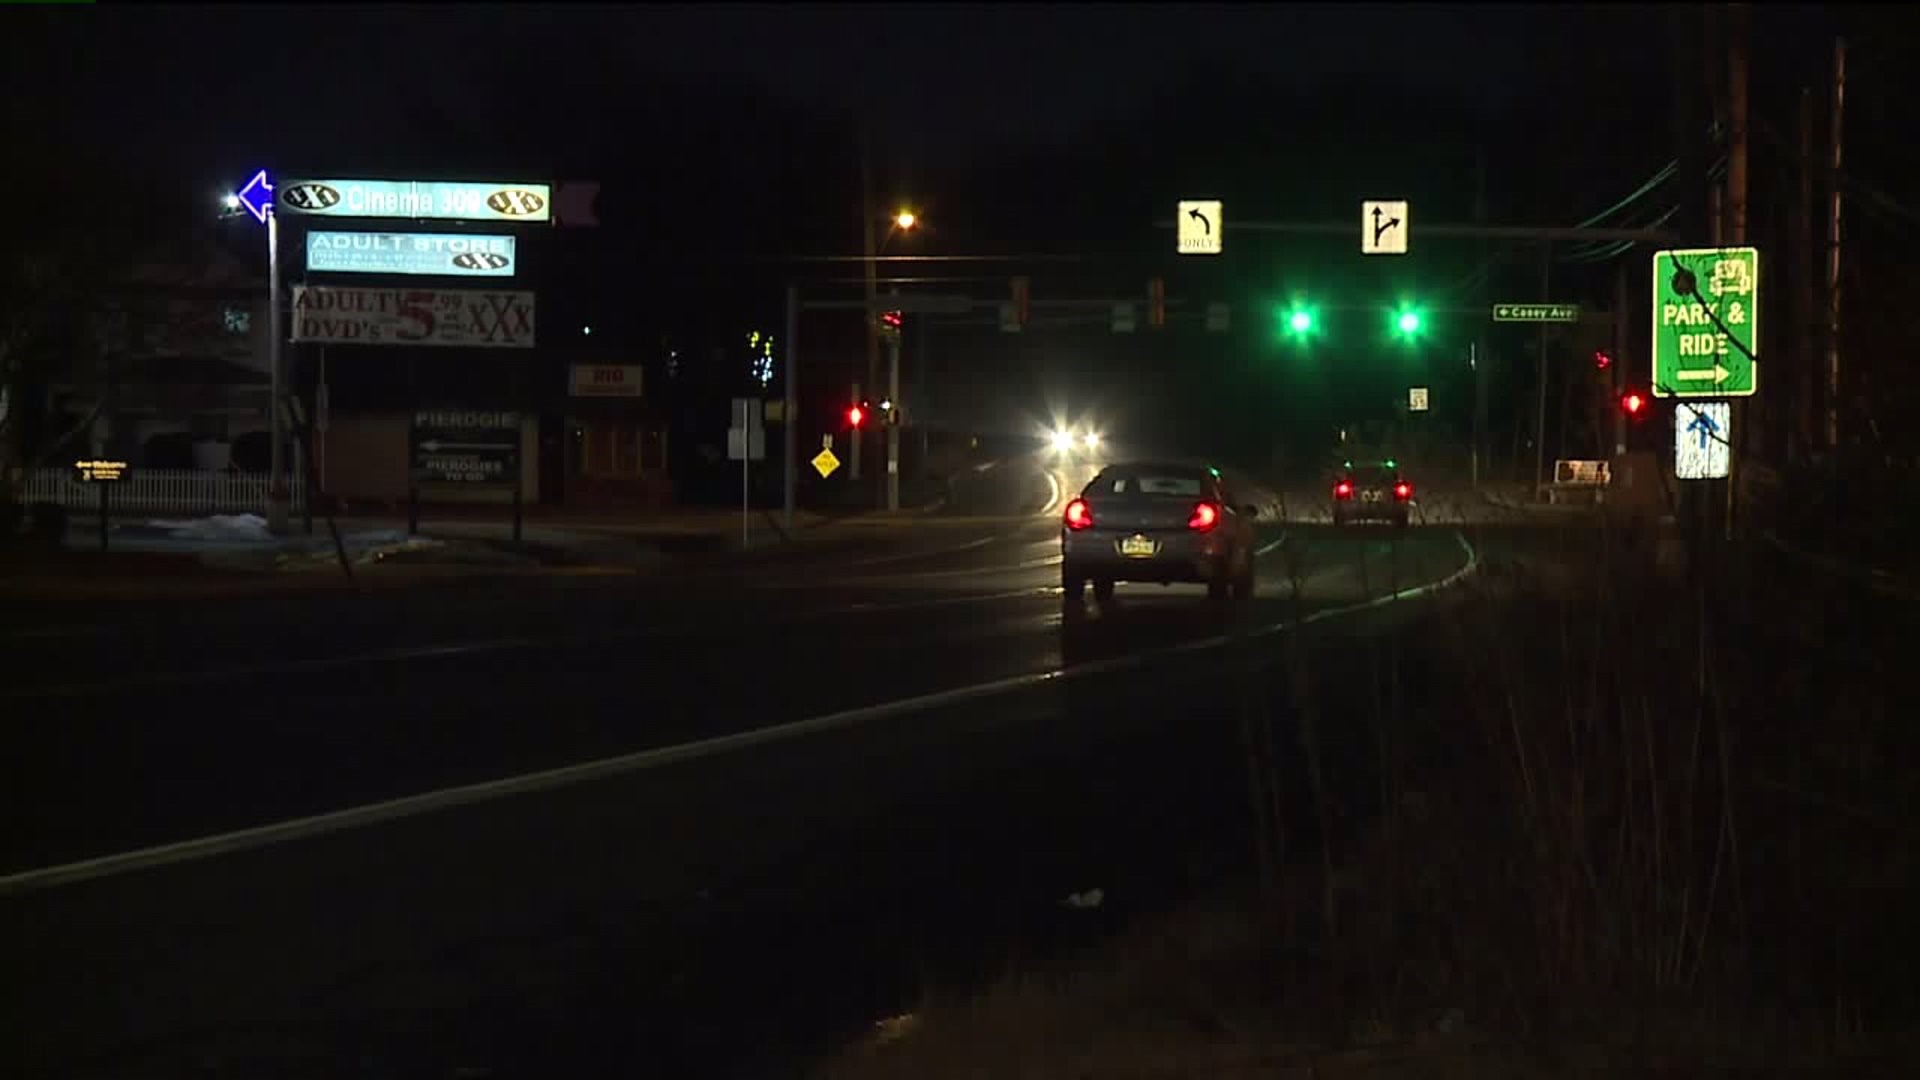 Two Pedestrians Hurt in Hit and Run near Wilkes-Barre